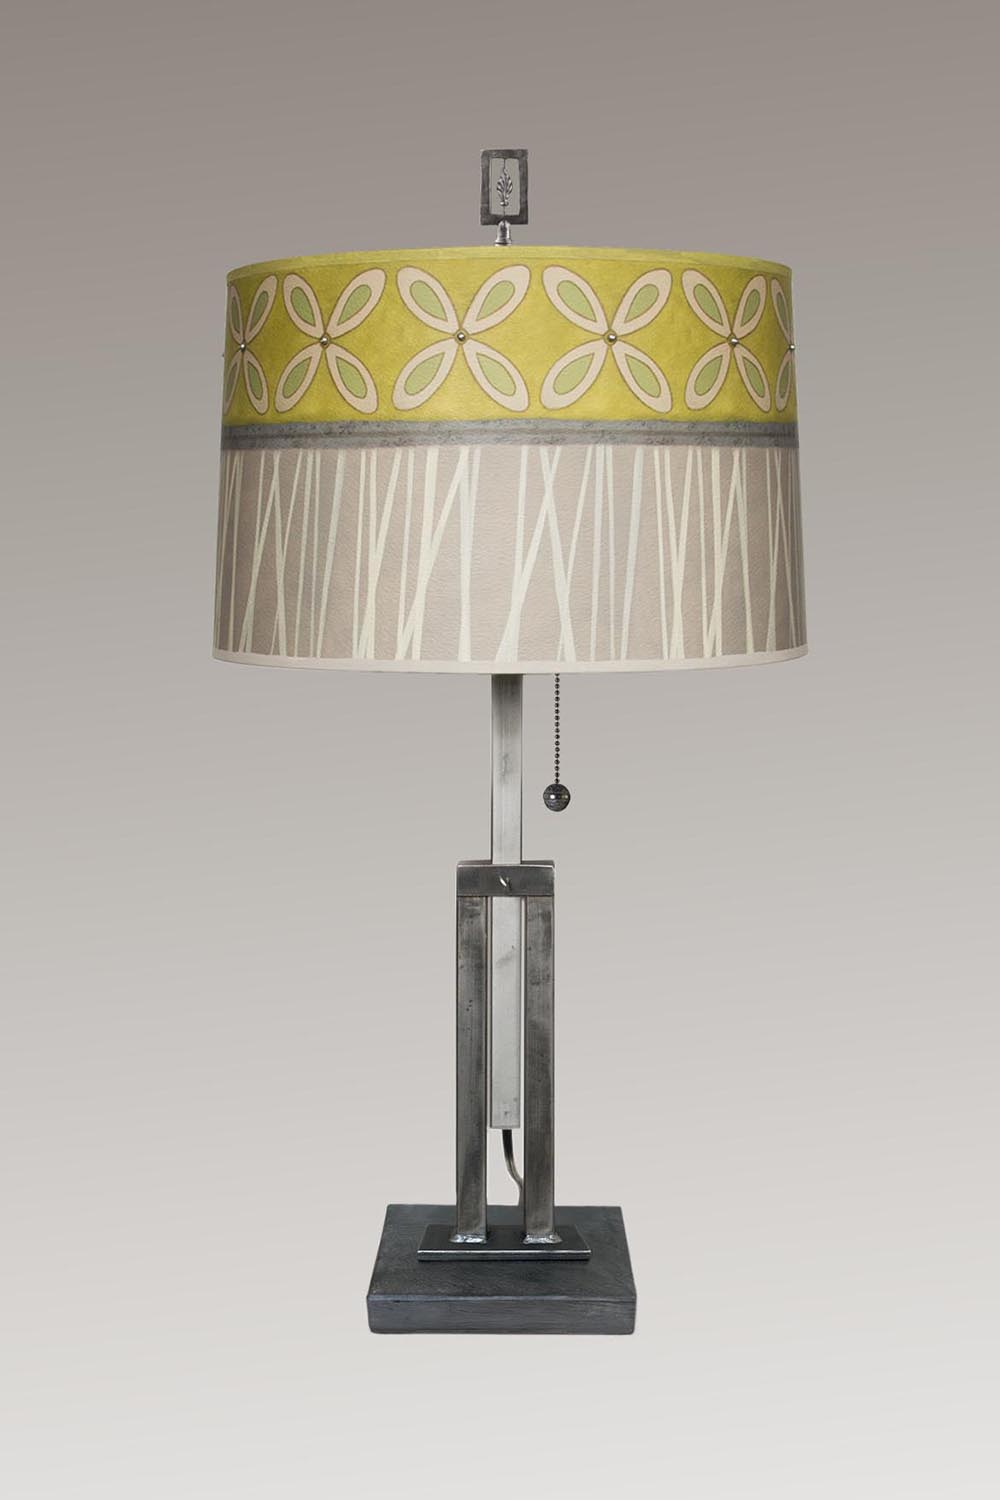 Adjustable-Height Steel Table Lamp with Large Drum Shade in Kiwi